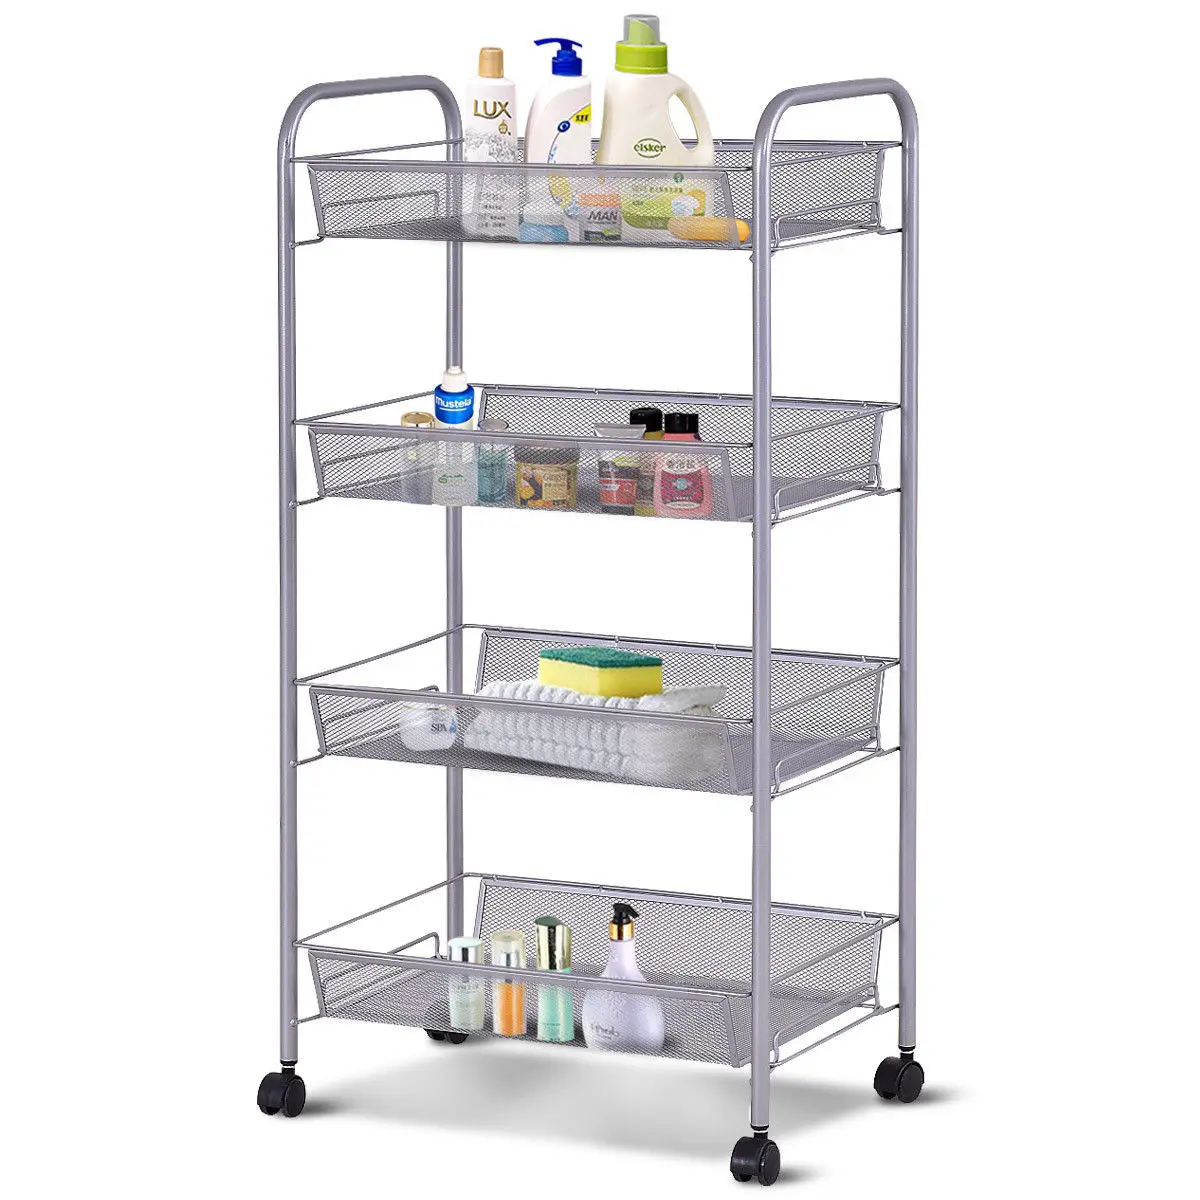 Kitchen and Bathroom COSTWAY 4-Tier Folding Trolley Cart Organiser Serving Shelf Utility Organization Storage Shelving Rack for Home Max Load 20kg Each Stage